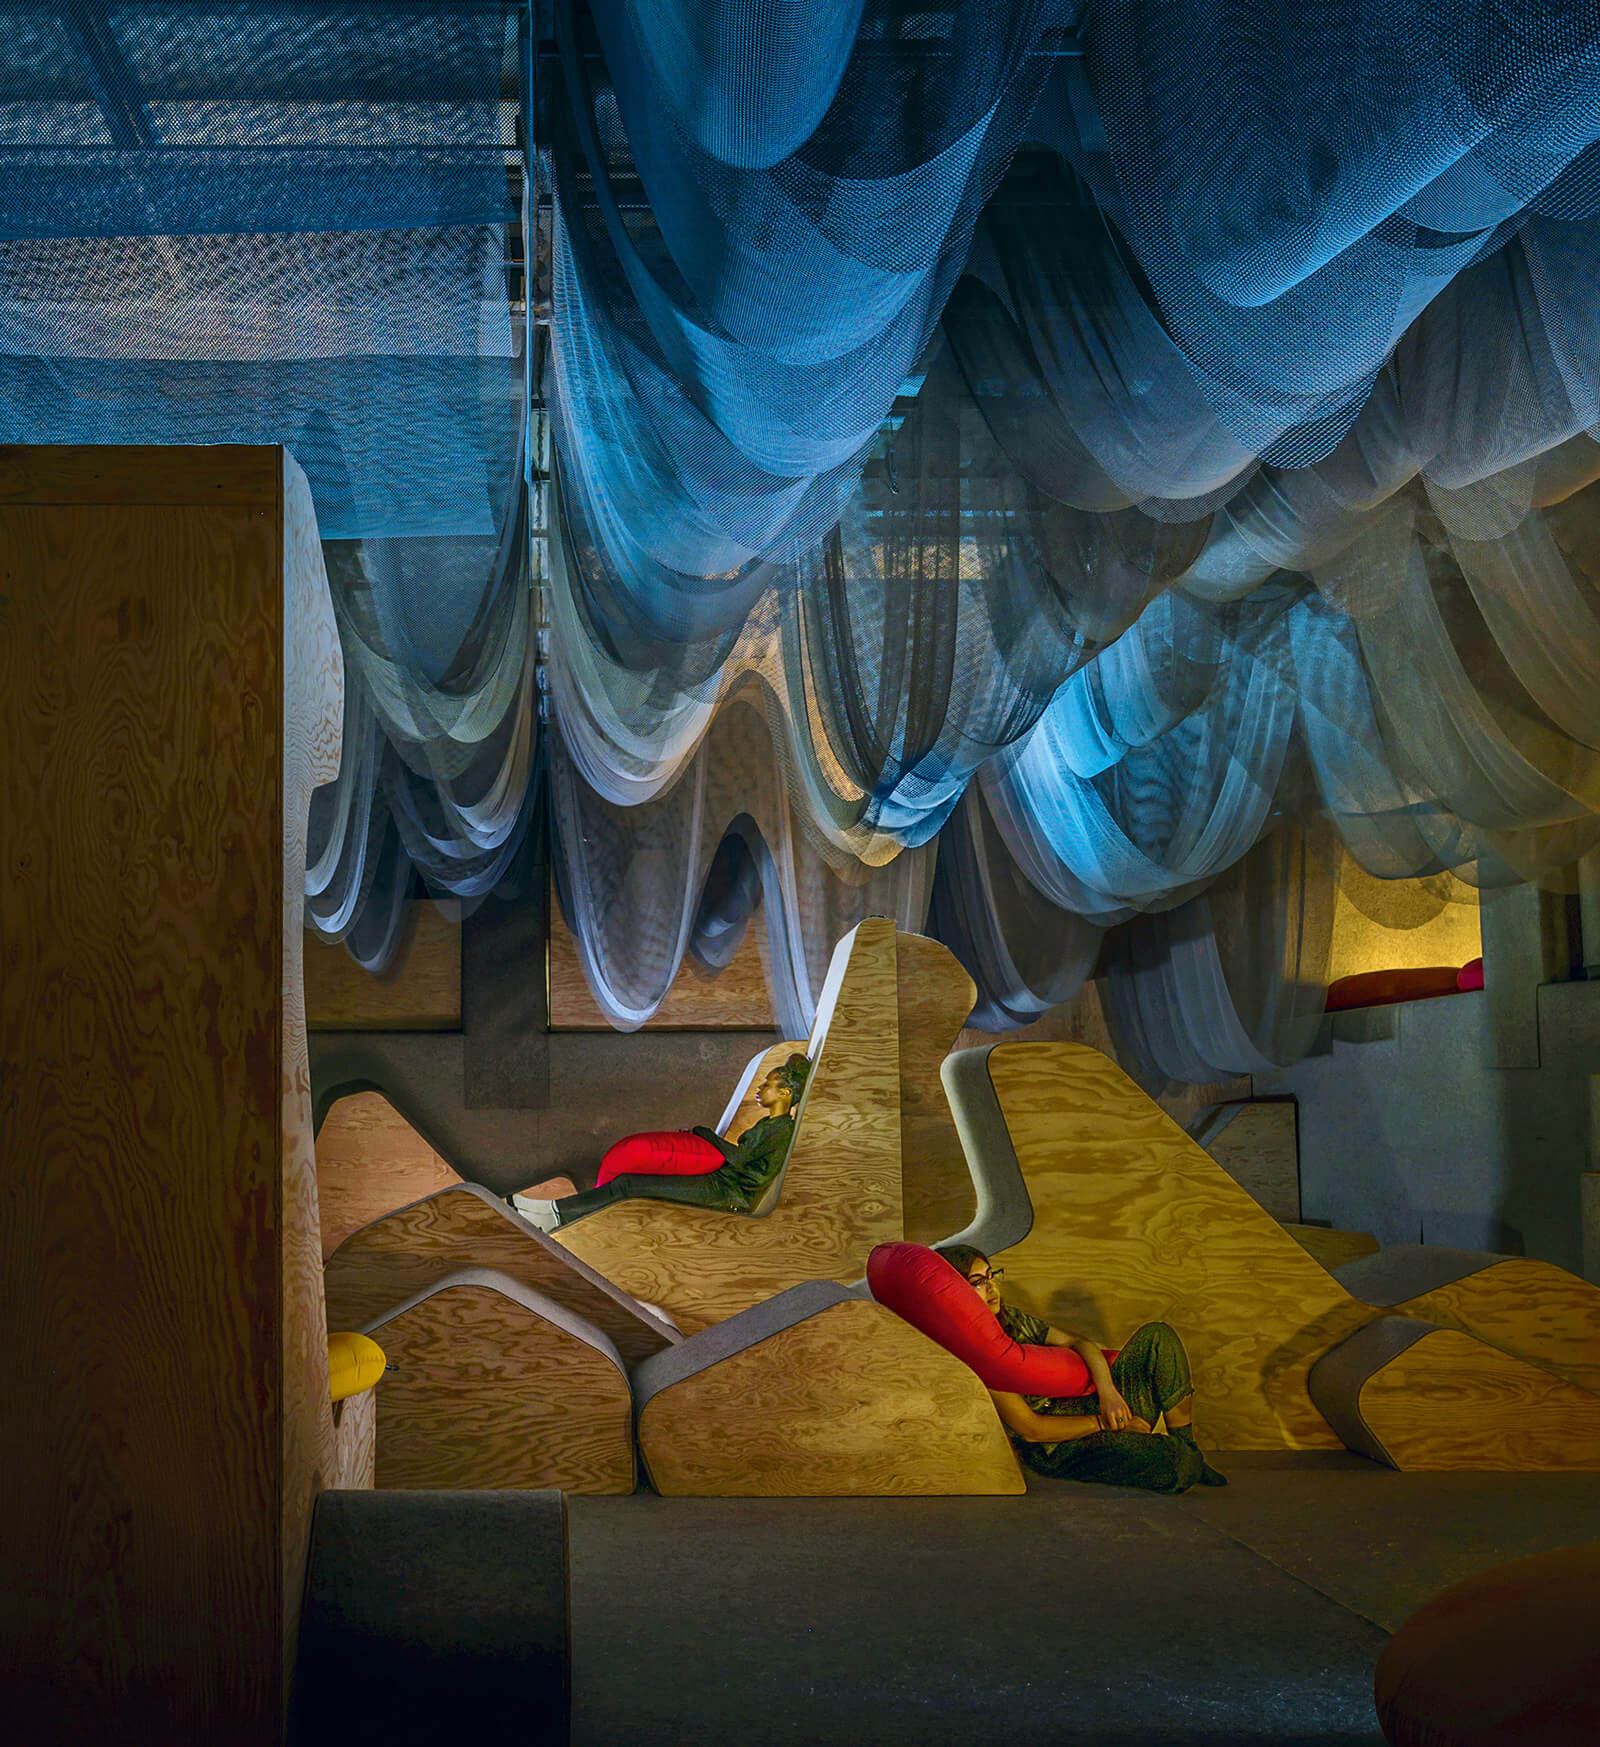 A photograph of two people in “New Circadia,” an experimental space by Richard Sommer and Pillow Culture (Natalie Fizer and Emily Stevenson), at the Architecture and Design Gallery, University of Toronto, twenty nineteen to twenty twenty.